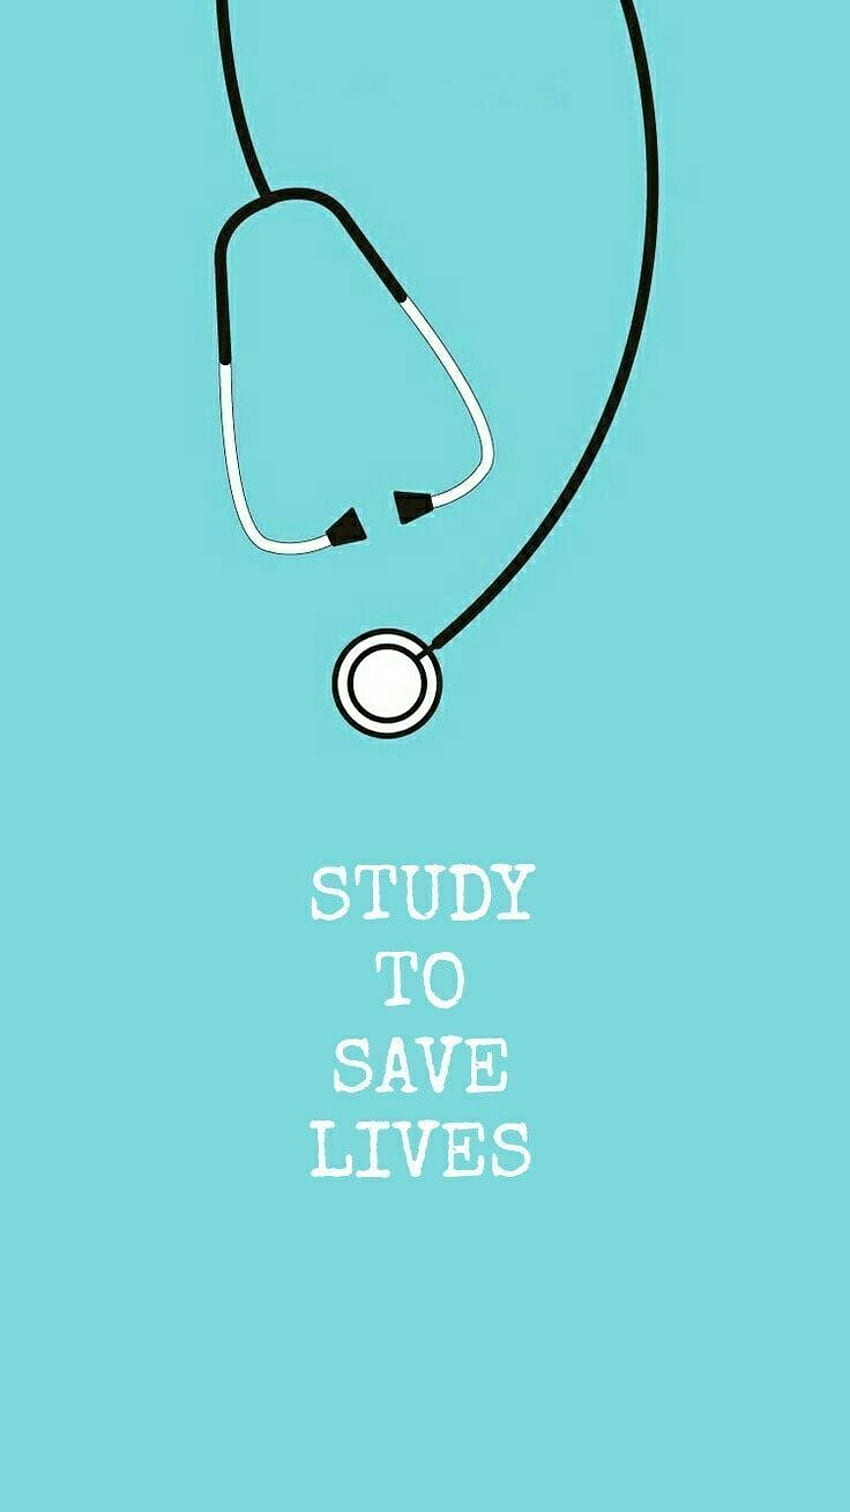 NaturalRemediesHayfever. Medical quotes, Doctor quotes medical, Medical student motivation, Doctor Medicine HD phone wallpaper